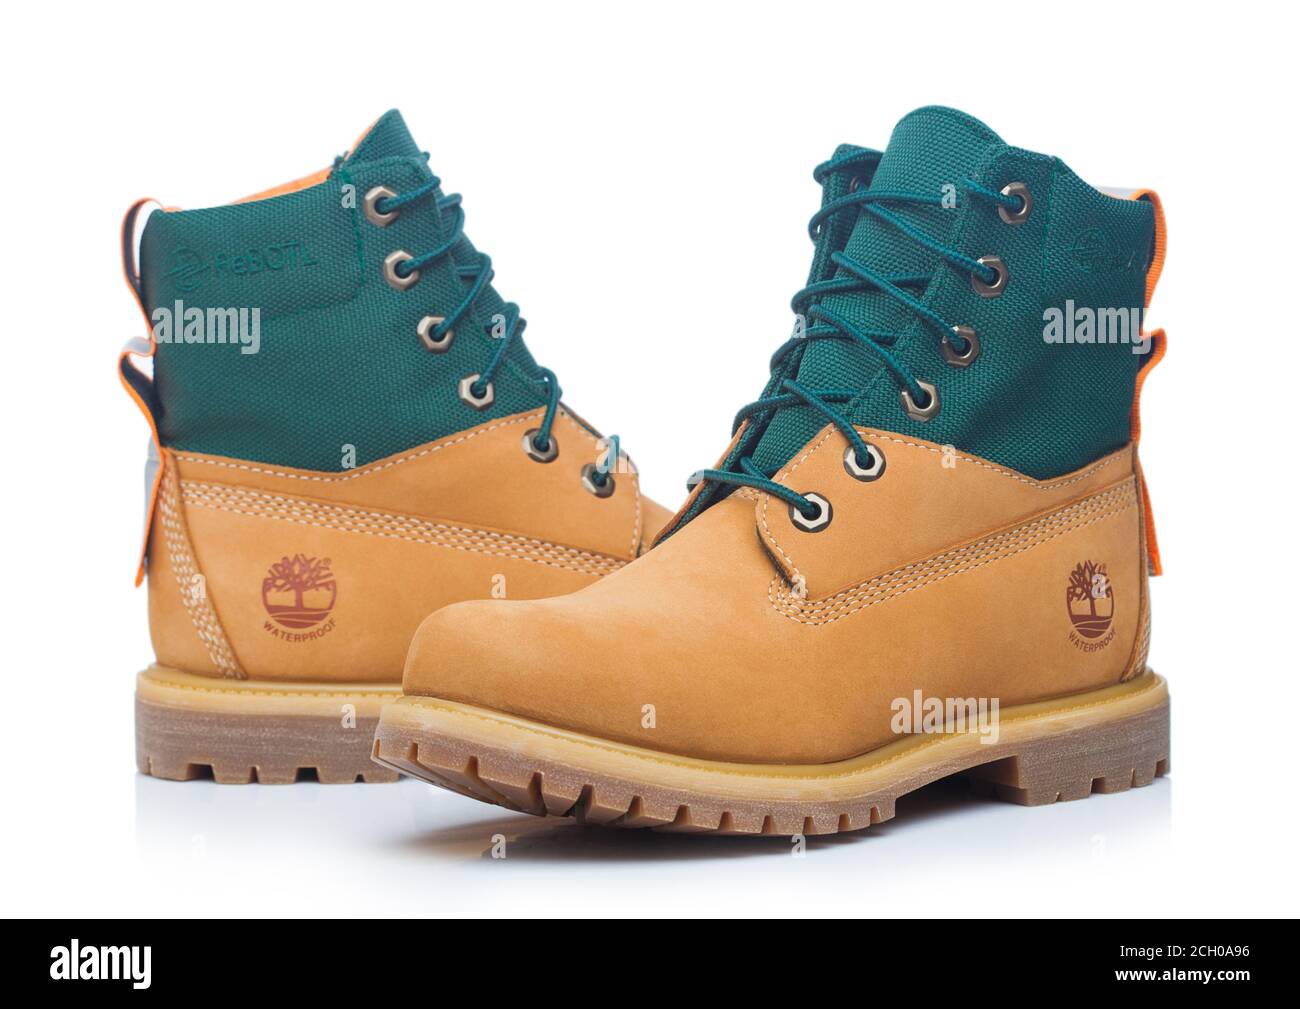 LONDON, UK - SEPTEMBER 09, 2020: Timberland 6 inch rebotl fabric and leather boots for women in on white background Stock Photo - Alamy